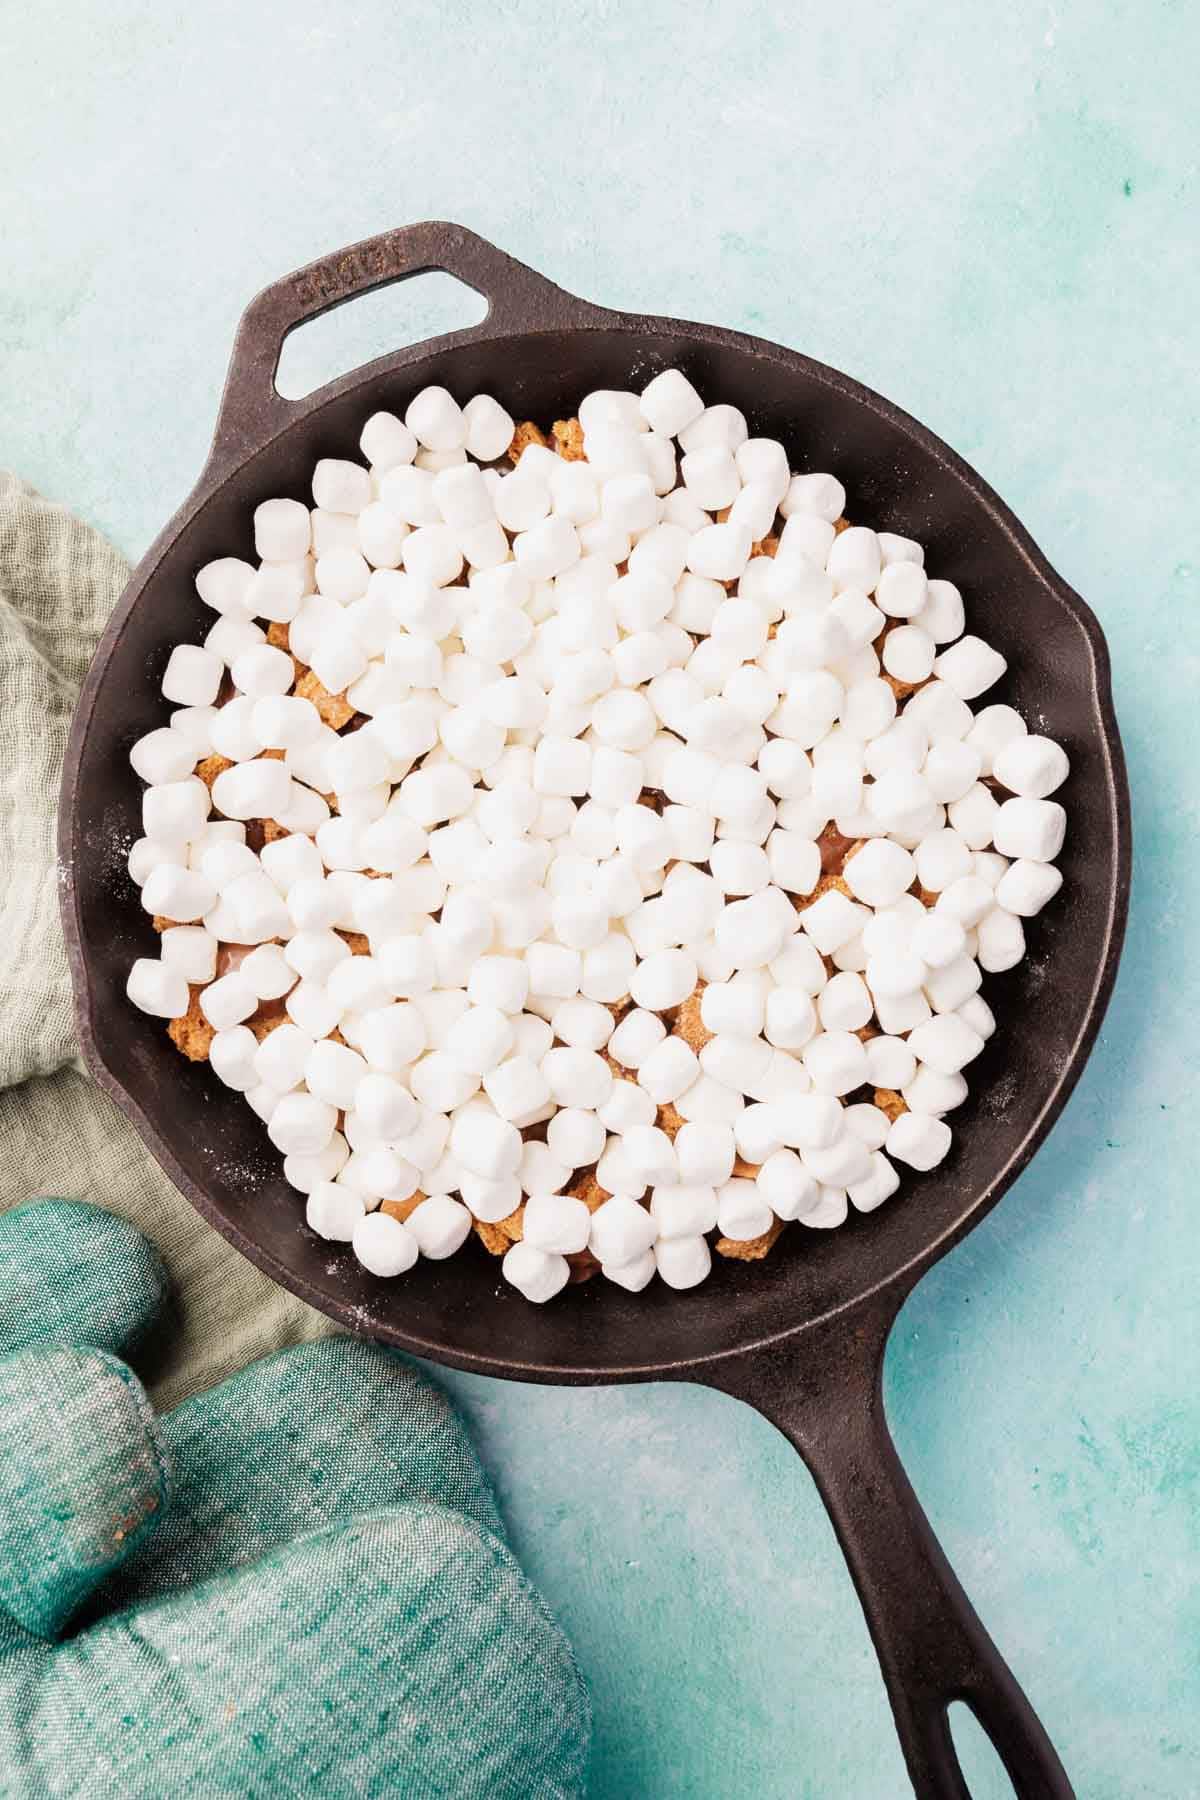 Marshmallows layered over chocolate in a cast iron skillet.